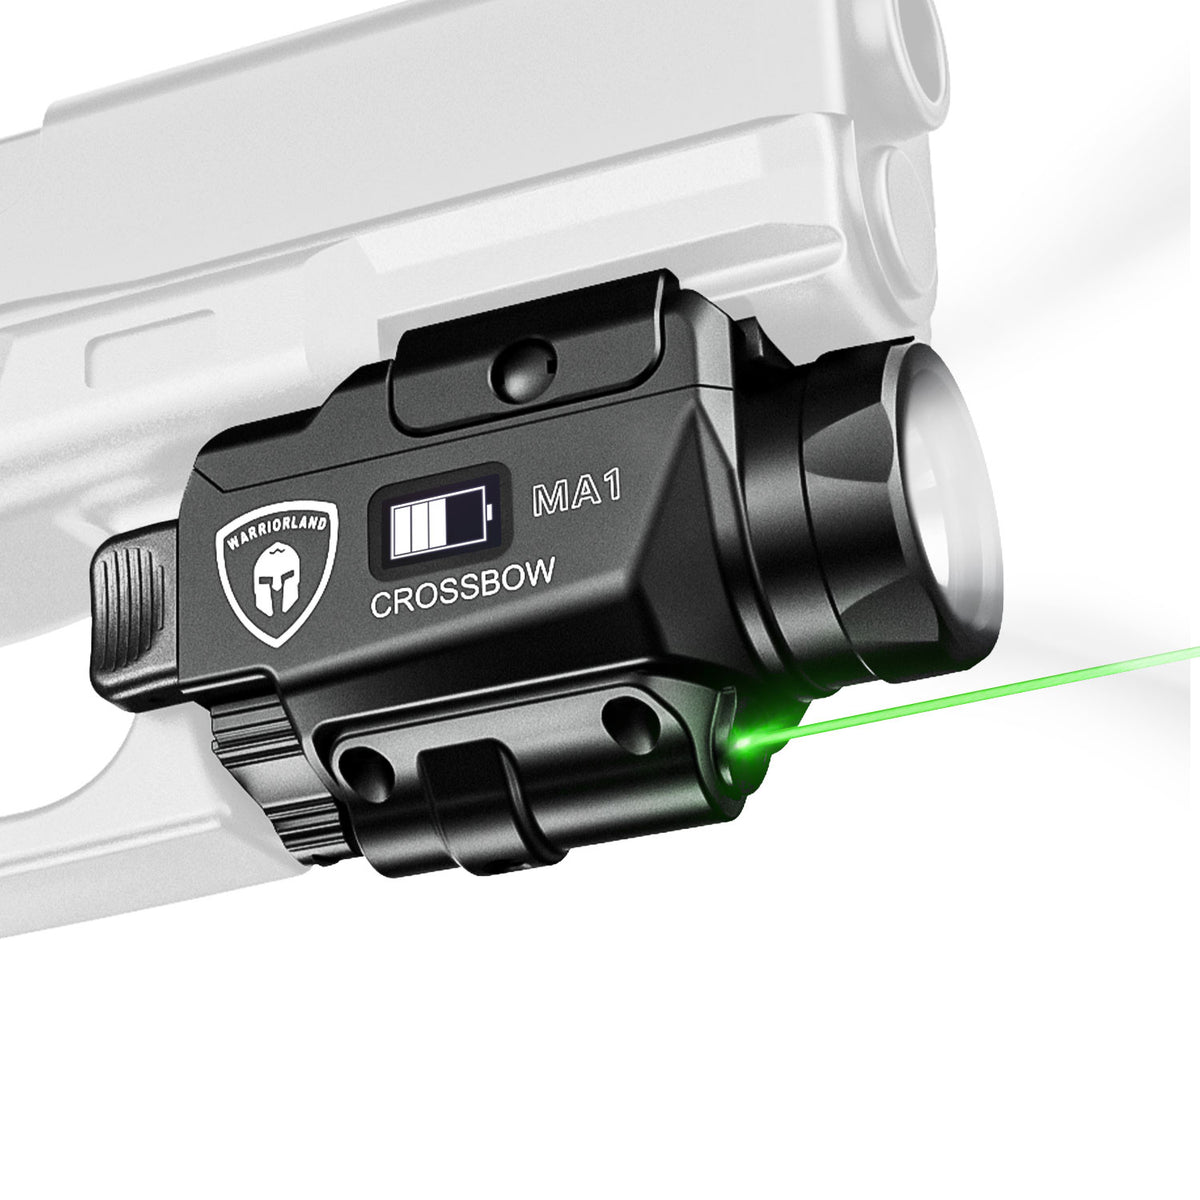 Crossbow MA1 800 Lumens Rail Mounted Universal Weaponlight for Pistol, Green Laser & White LED Combo Tactical Light, Magnetic USB Rechargeable Flashlight-Screen Displays Battery Status|WARRIORLAND